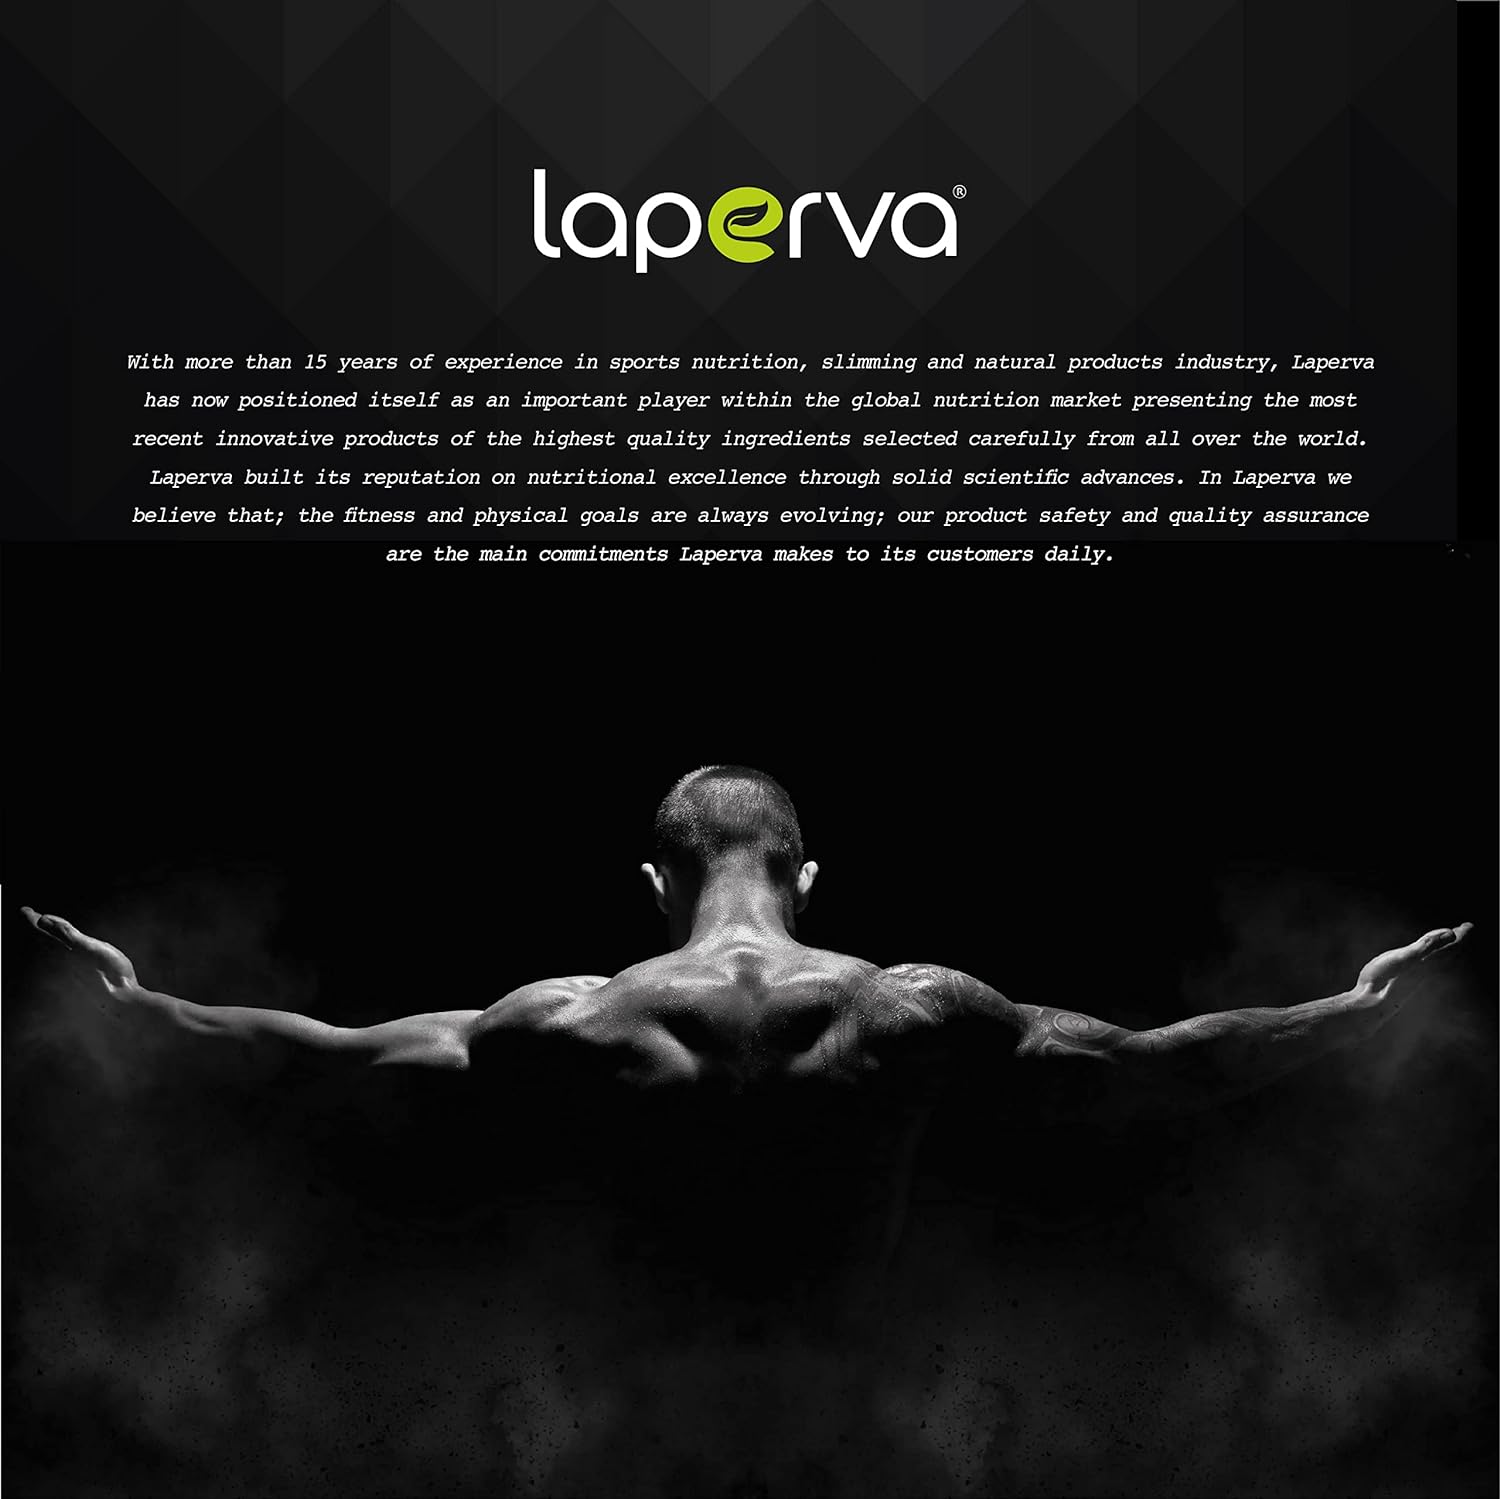 Laperva Triple Power Pre-Workout - Explosive Energy, Focus, and Performance Booster with Beta-Alanine, Creatine, and BCAAs - Enhance Stamina and Muscle Growth (Crazy Cola, 30 servings)